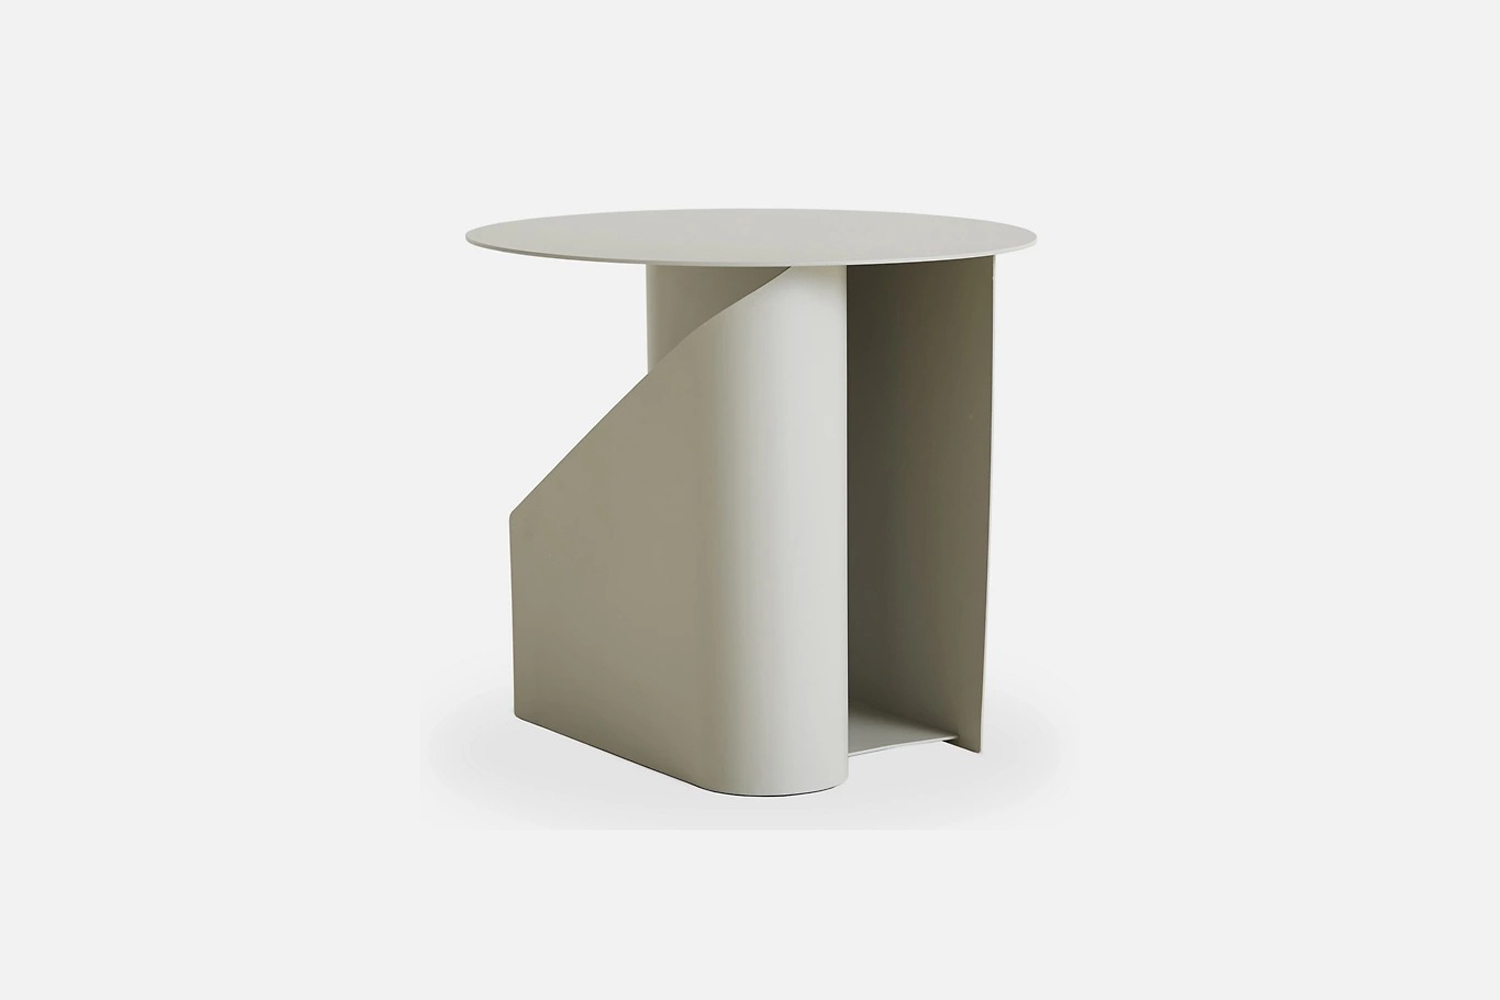 designed by woud, the sentrum side table in warm grey is \$599 at lumens. 18